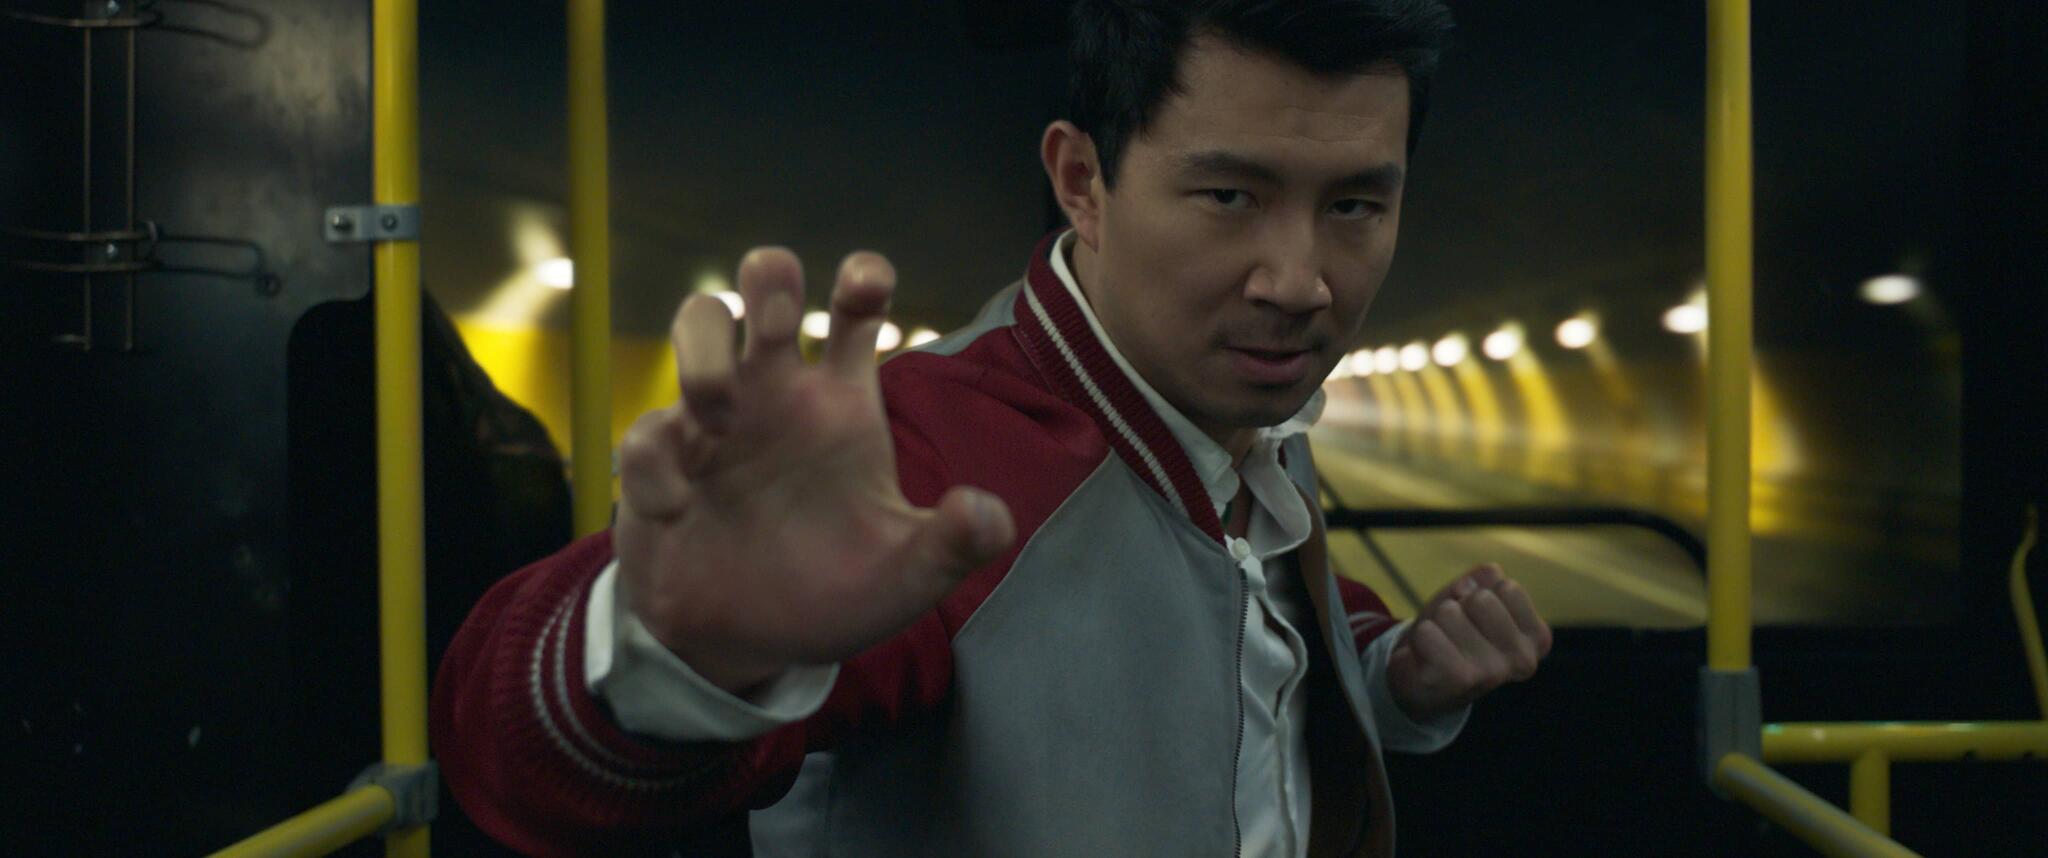 ‘Shang-Chi’ Delivers Epic Superhero Action and Positive Asian Representation